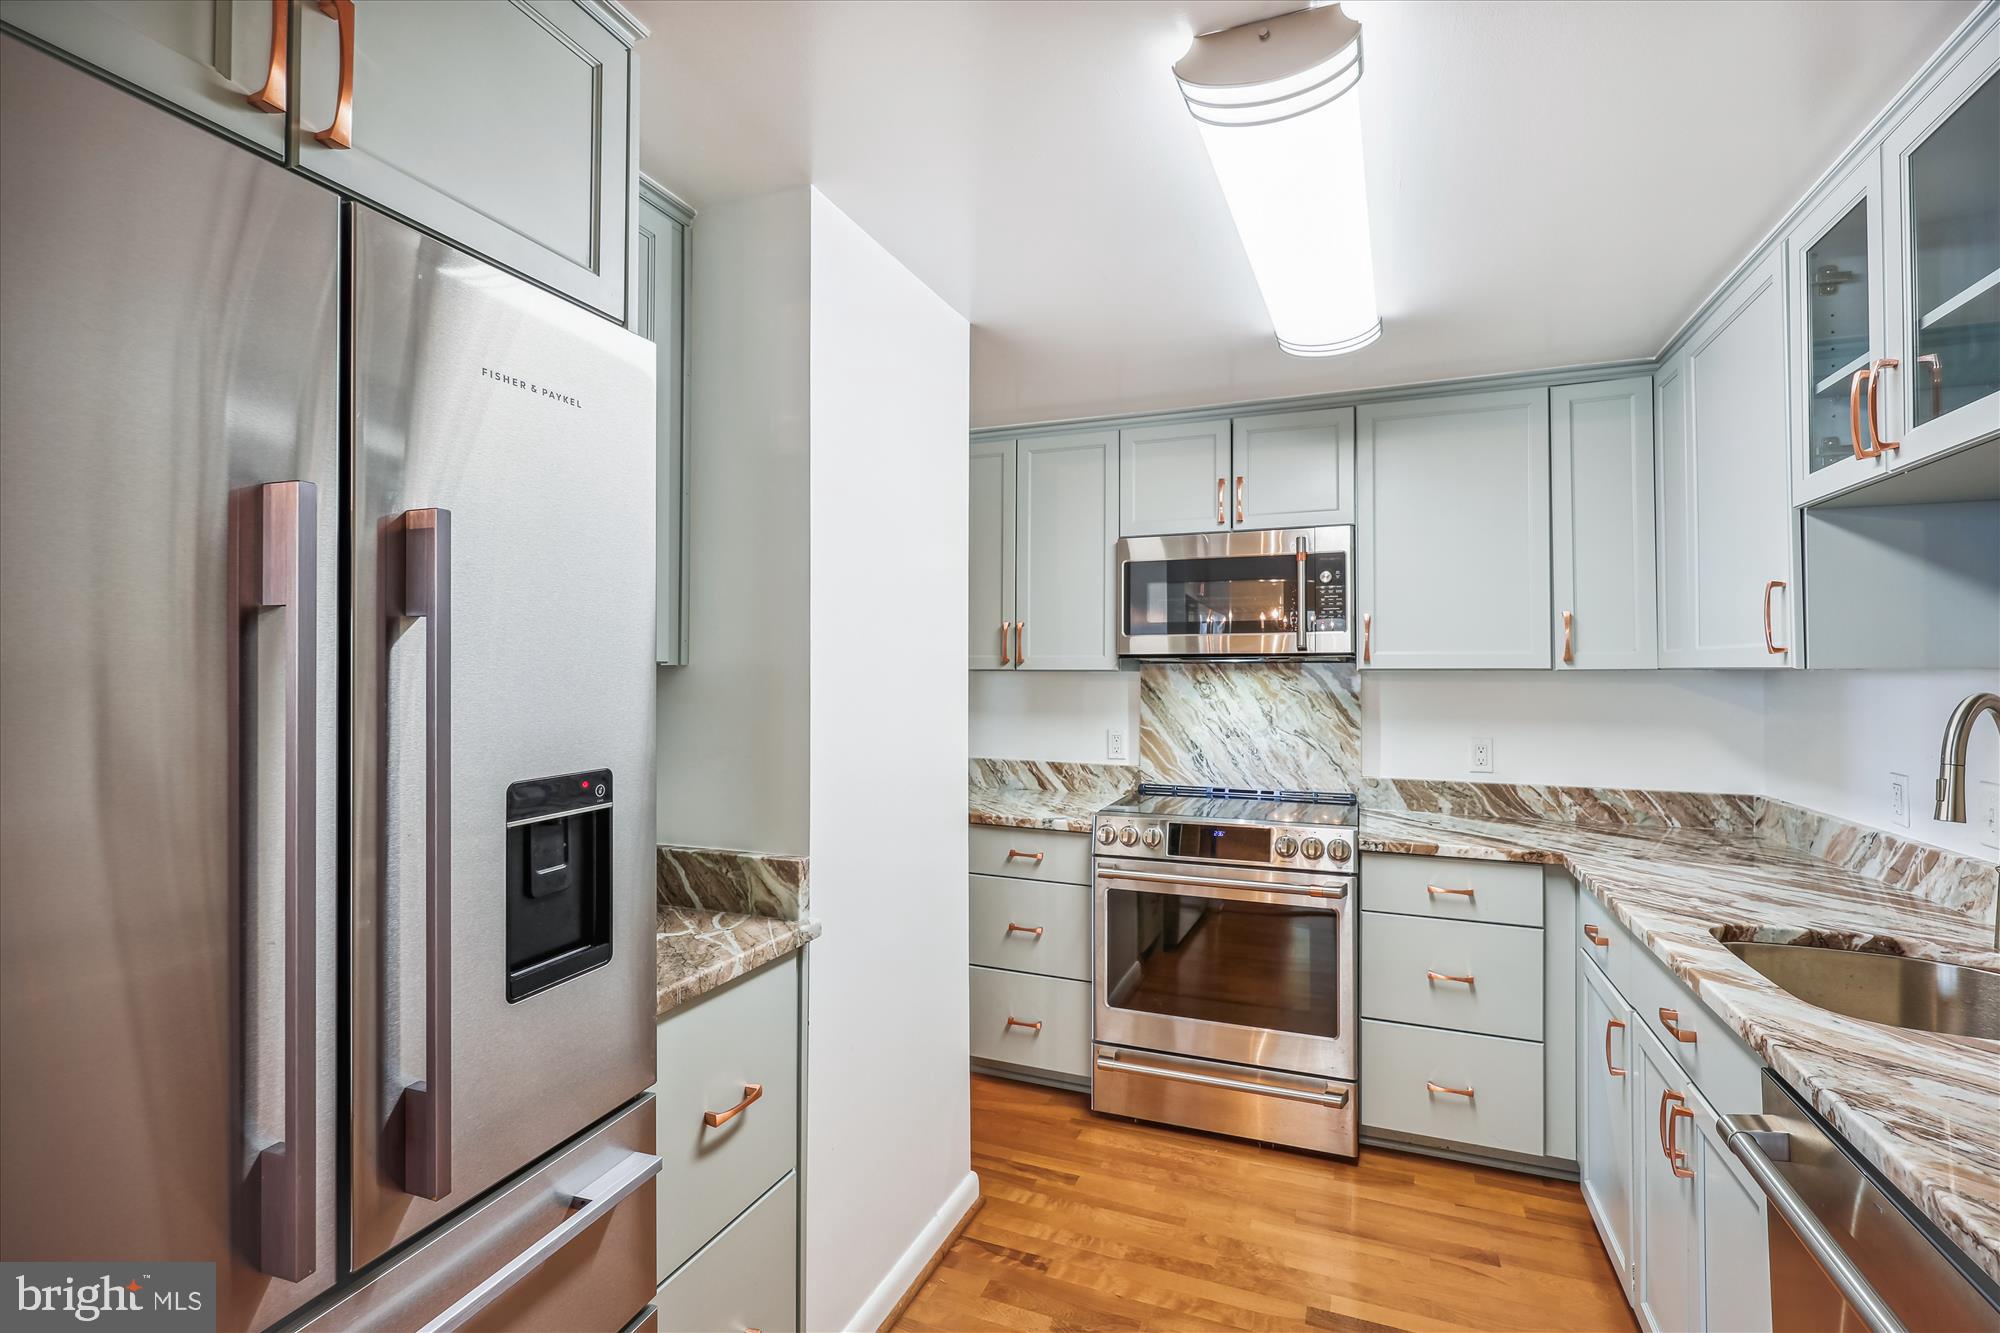 a kitchen with stainless steel appliances granite countertop a stove sink and refrigerator